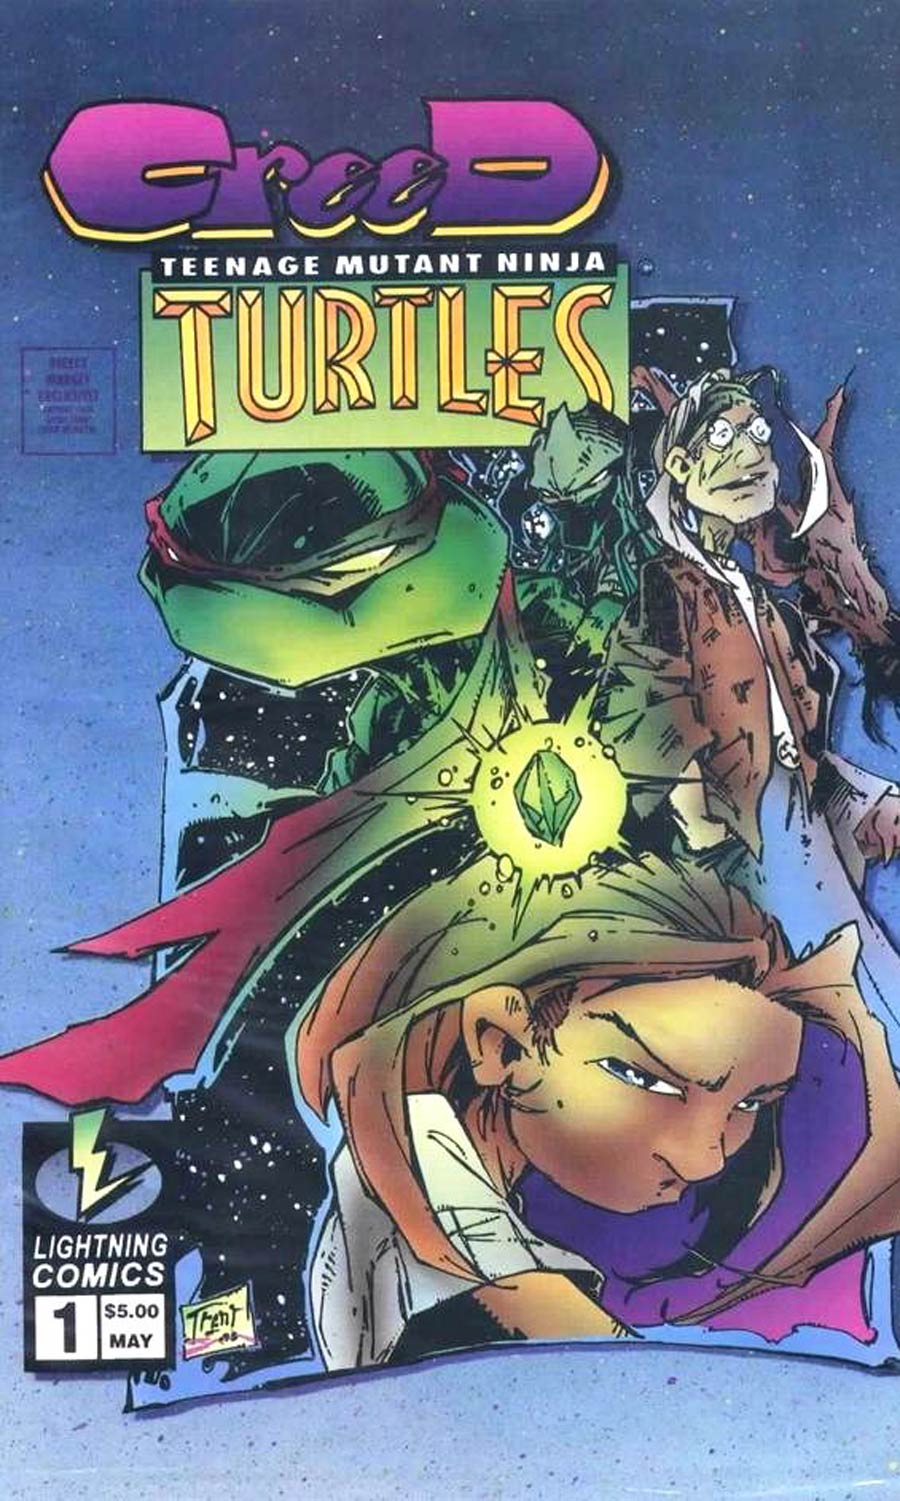 Creed Teenage Mutant Ninja Turtles #1 Cover E American Entertainment Exclusive Edition No Polybagged